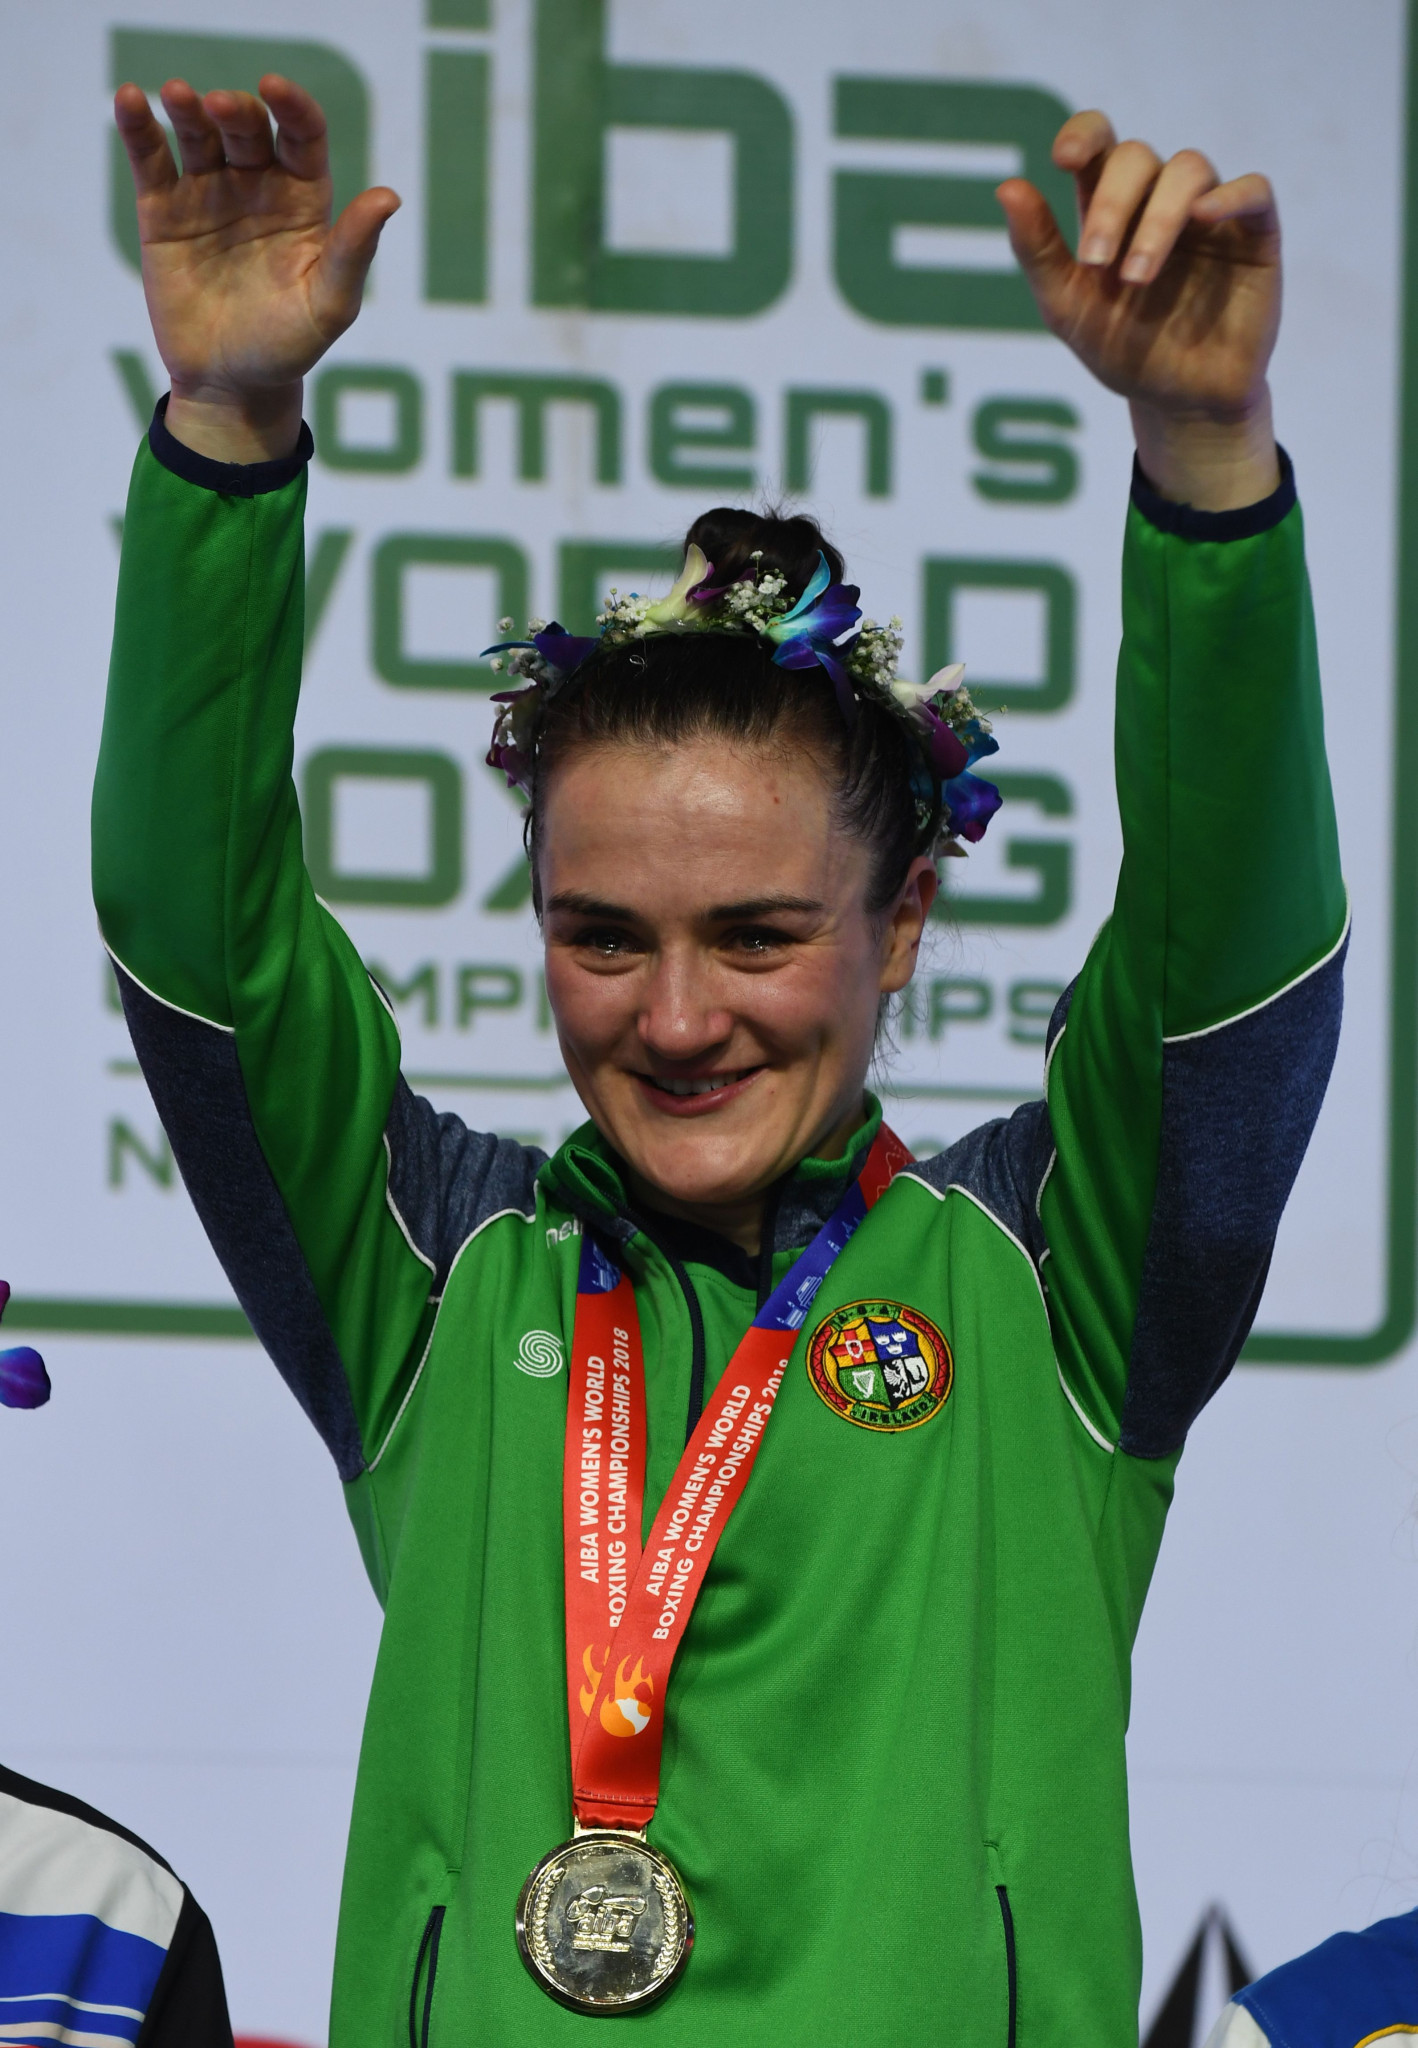 Kellie Harrington is among the 65 Irish athletes selected for the European Games ©Getty Images